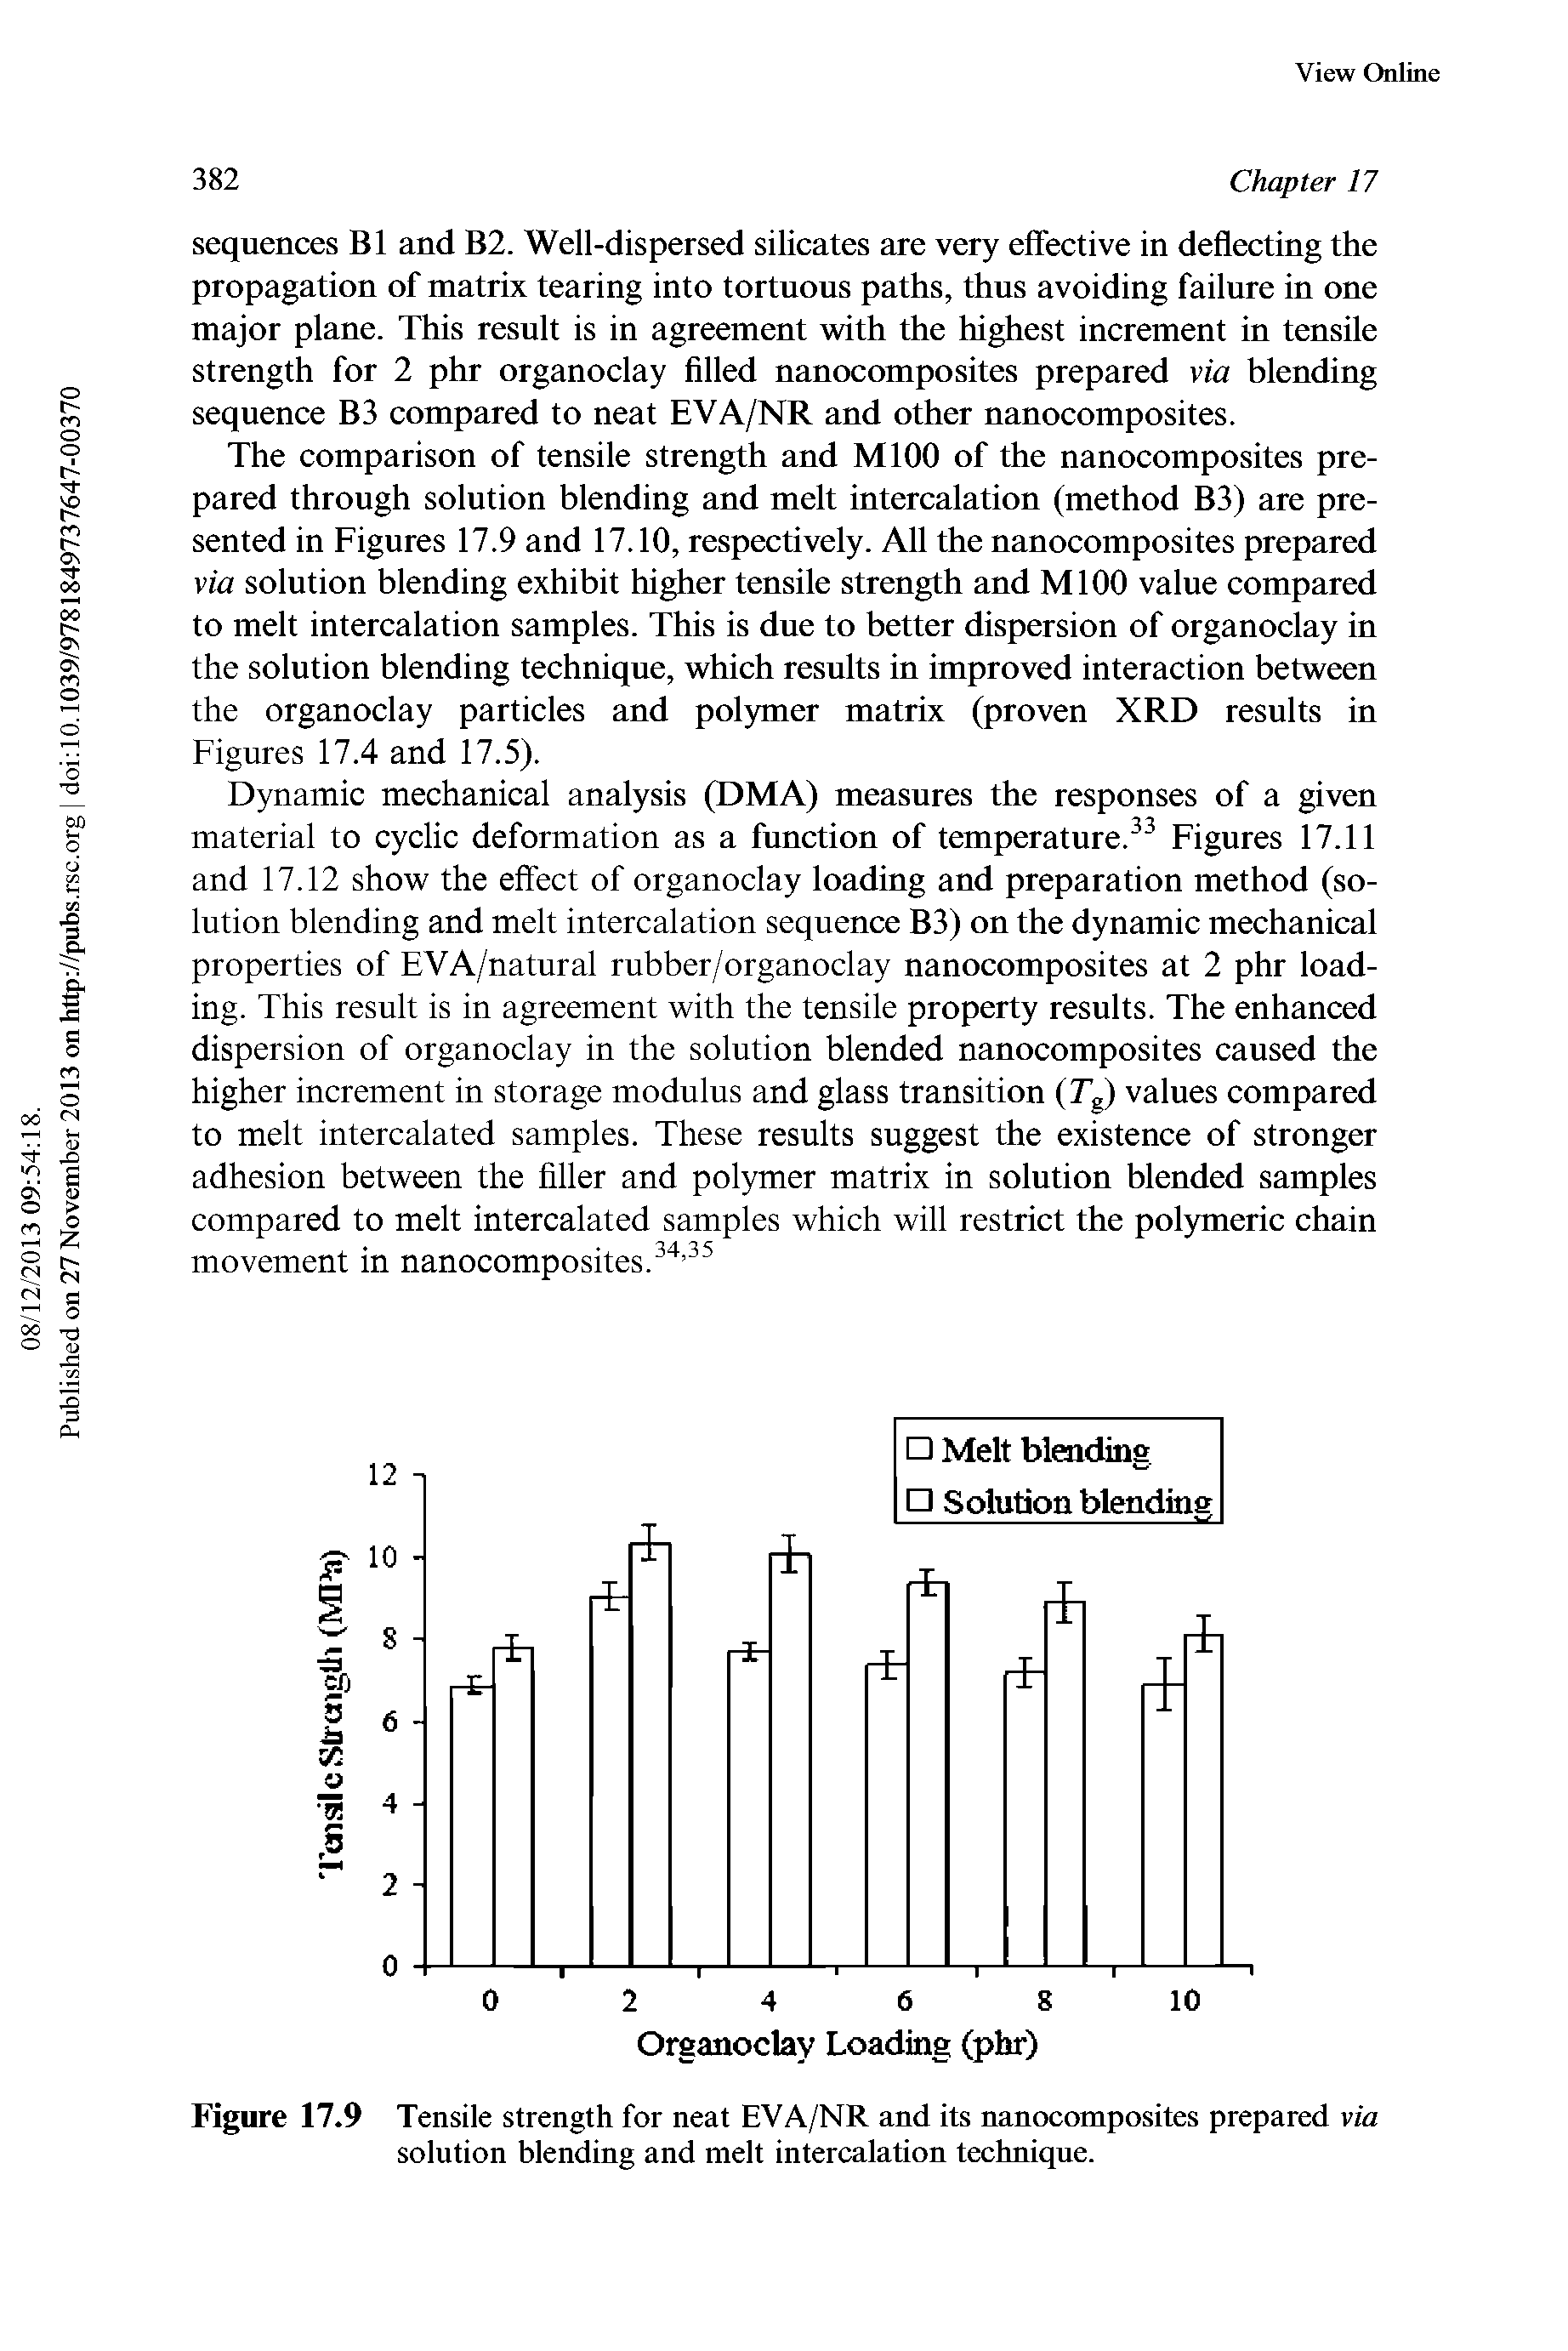 Figure 17.9 Tensile strength for neat EVA/NR and its nanocomposites prepared via solution blending and melt intercalation technique.